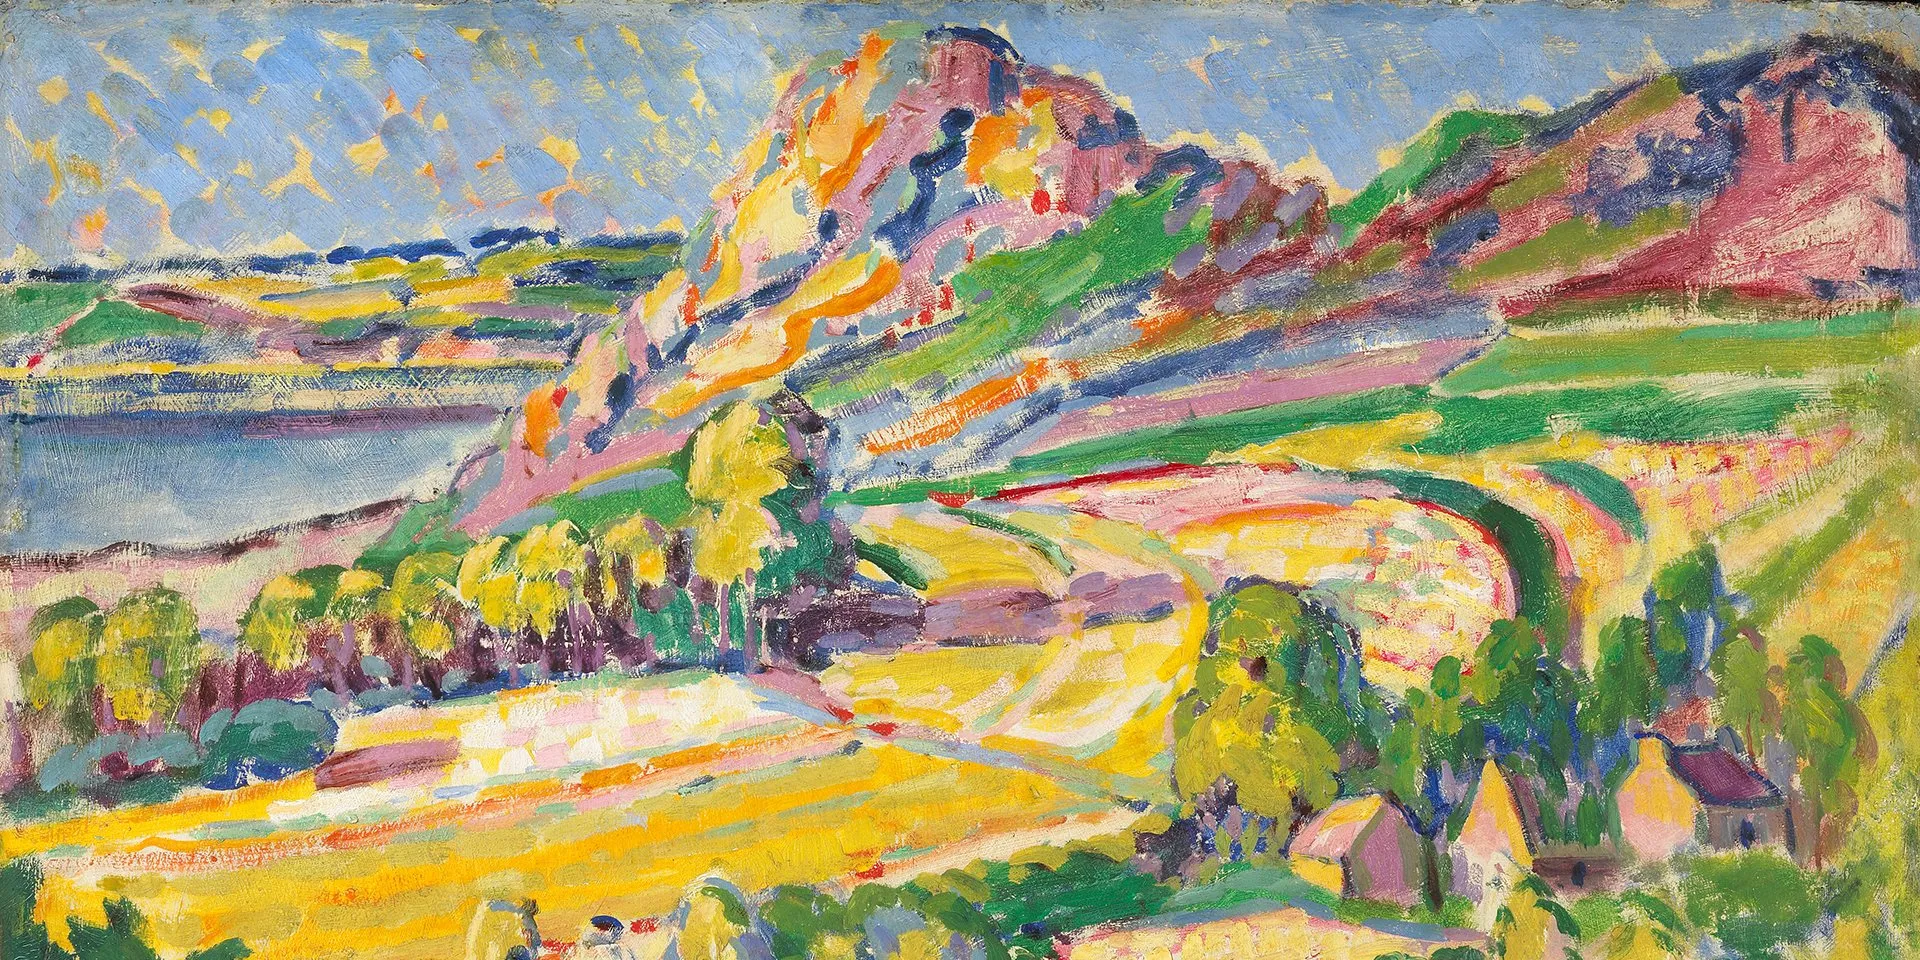 Emily Carr, Autumn in France (detail), 1911. Oil on paperboard, 49 x 65.9 cm. National Gallery of Canada, Ottawa Photo: NGC

